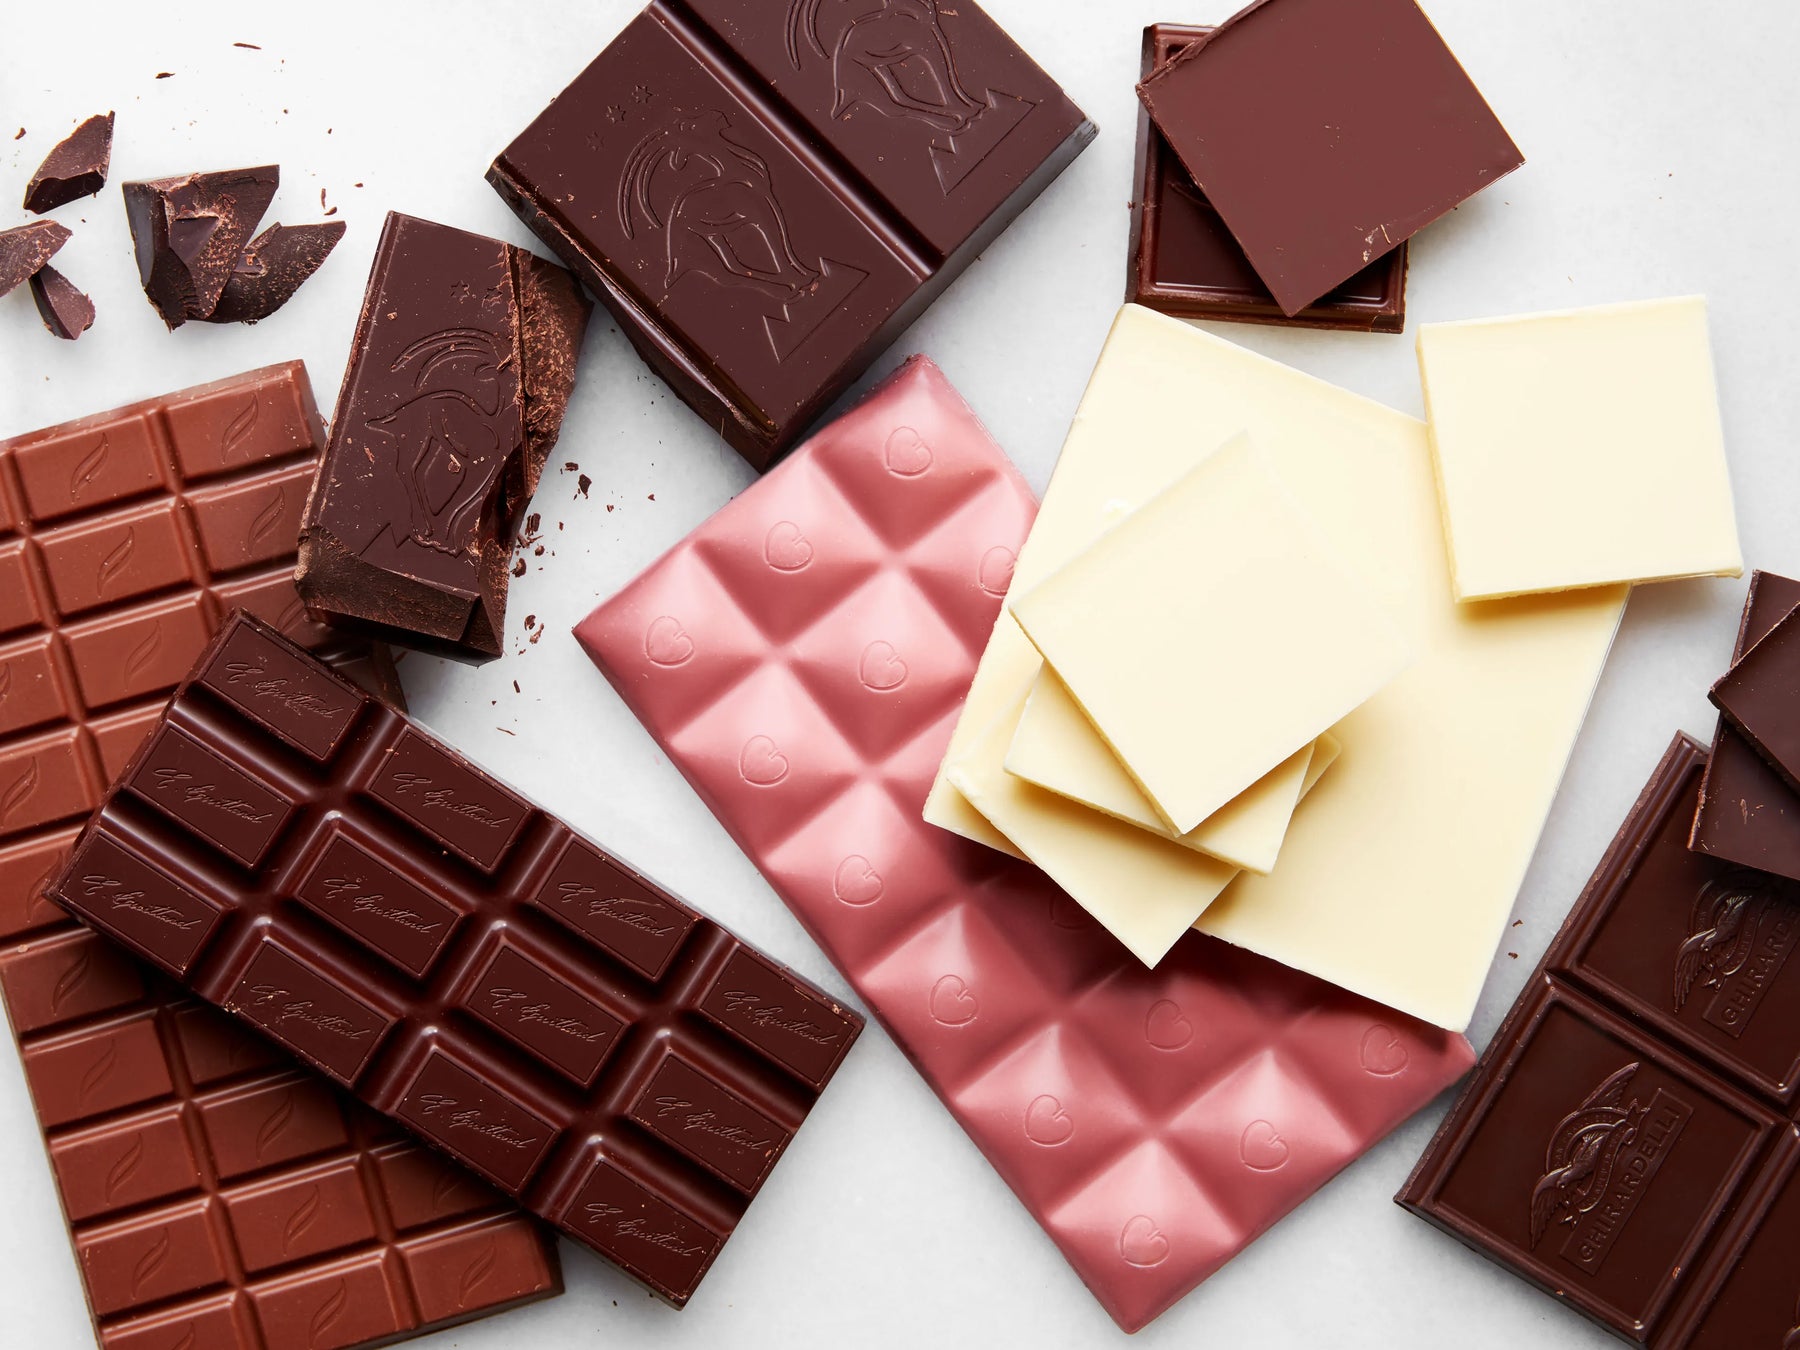 Uncovering the Most Decadent Chocolate Varieties